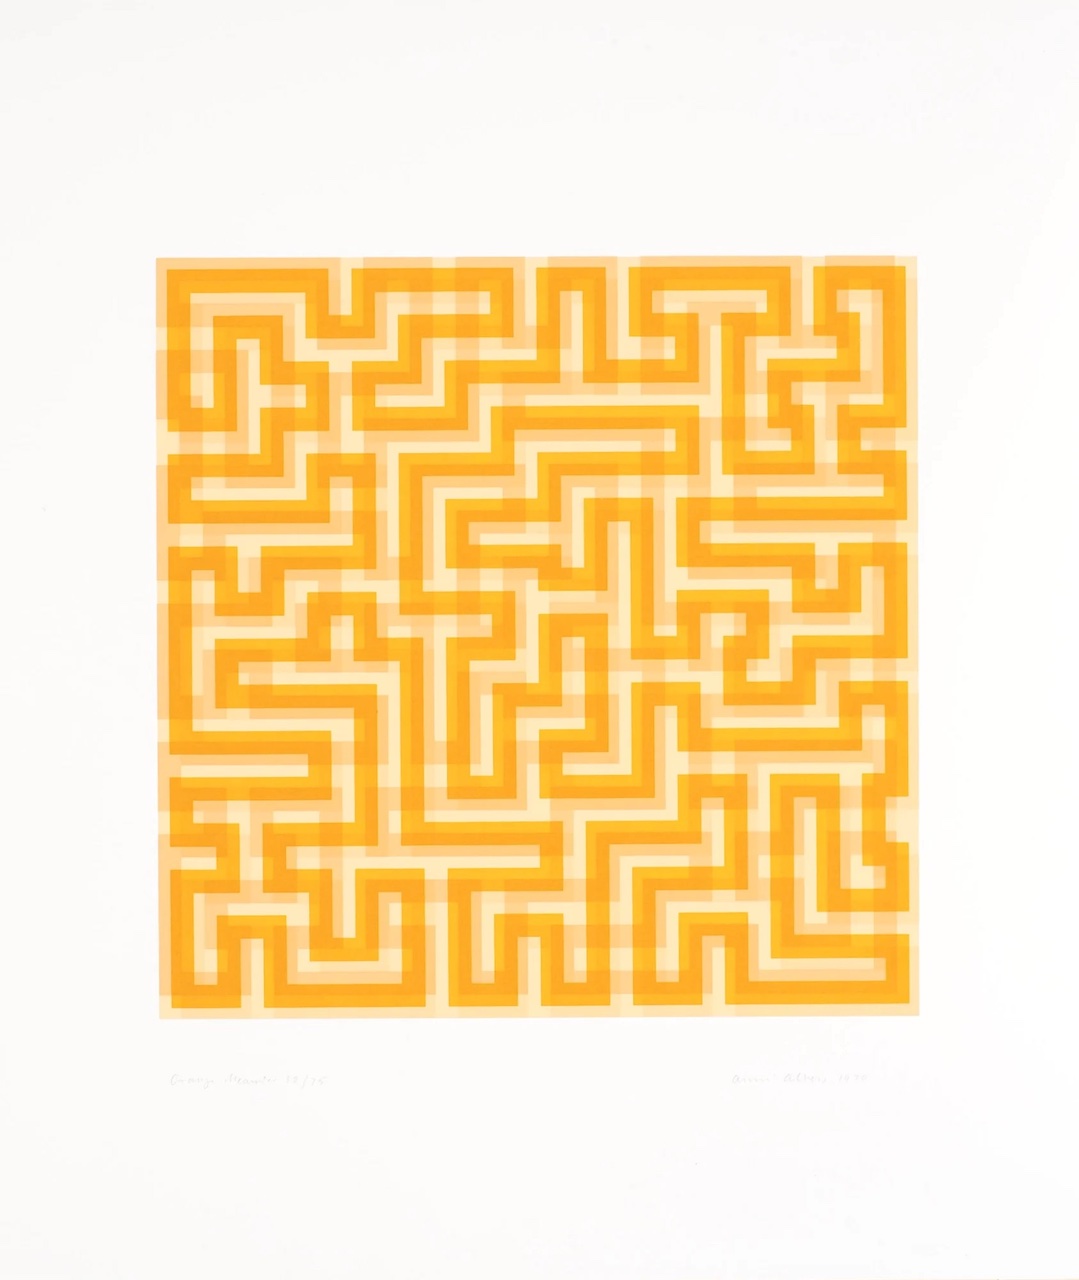 The Wick - Anni Albers
Orange Meander, 1970
Screenprint on Mohawk Superfine paper RM 21
Edition of 75